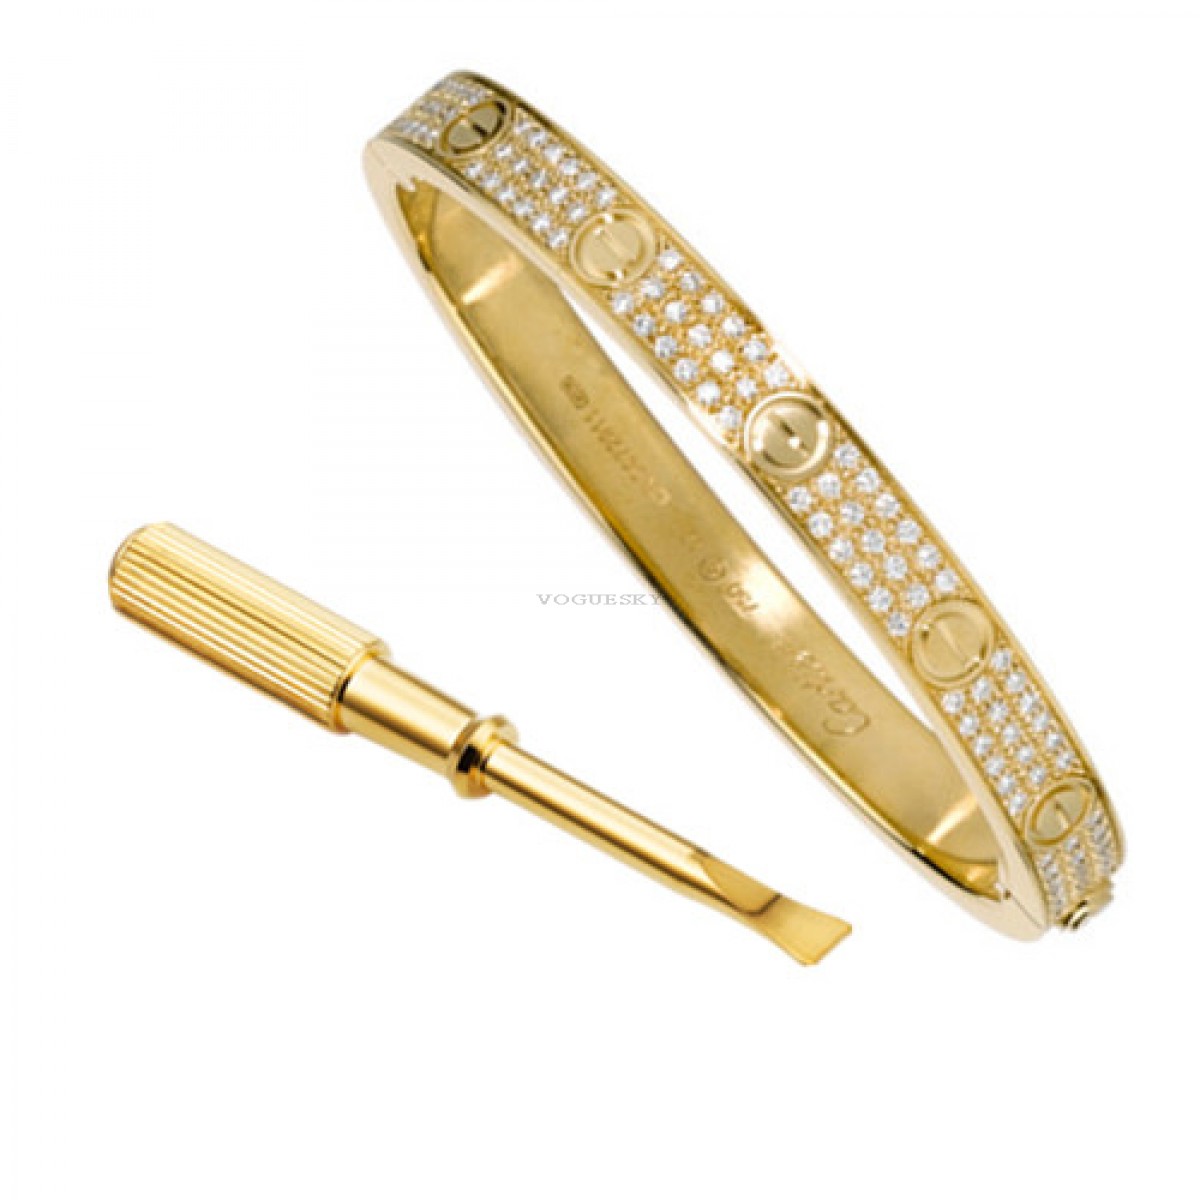 Cartier Love Bracelet yellow gold size 17 large model with... for  Rs.549,966 for sale from a Seller on Chrono24